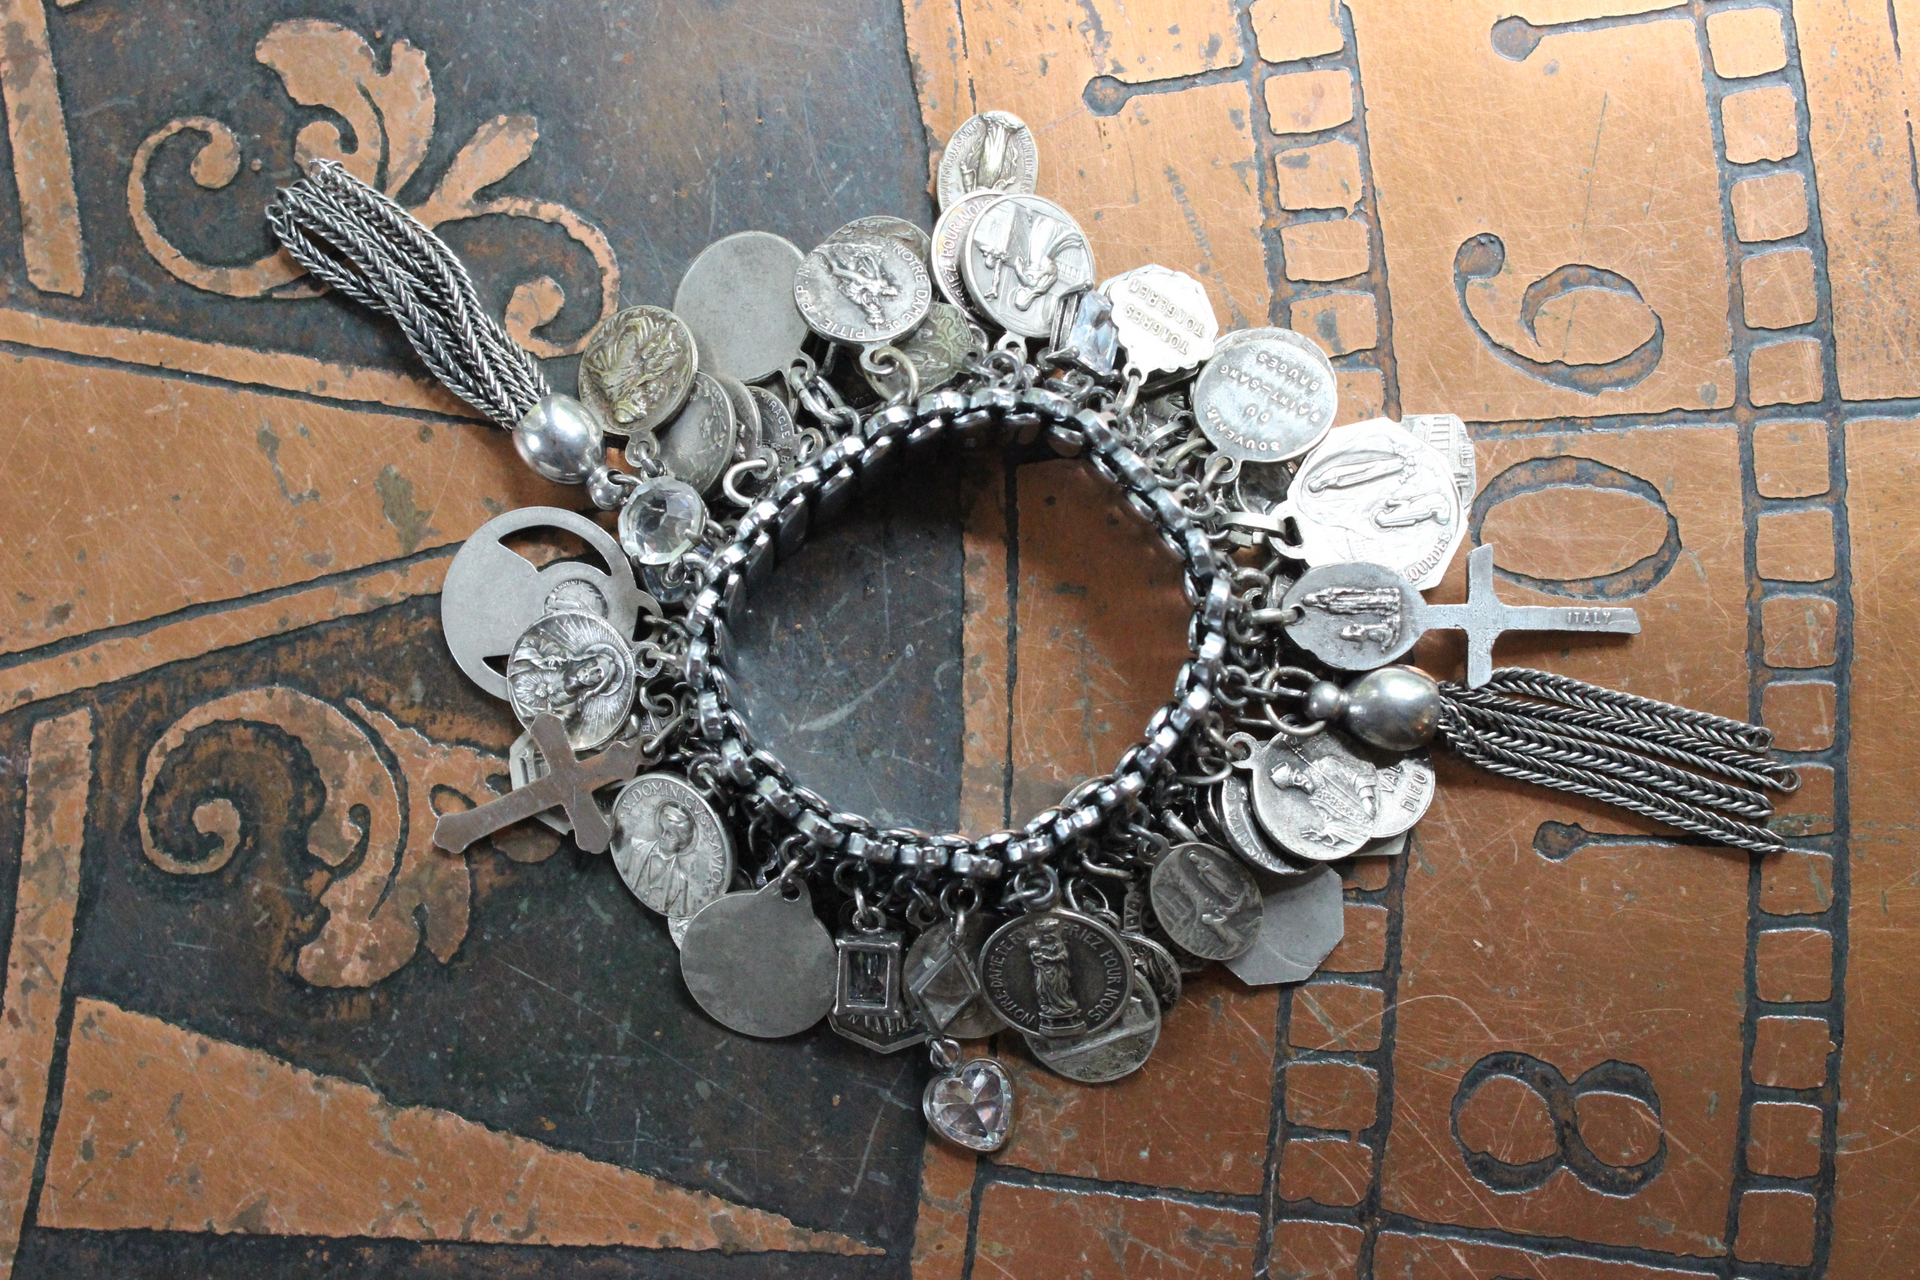 OOAK Antique French Medals Expanding Fully Loaded Charm Bracelet with over 72 Antique Medals, Crosses, Crystals, & Drops!!